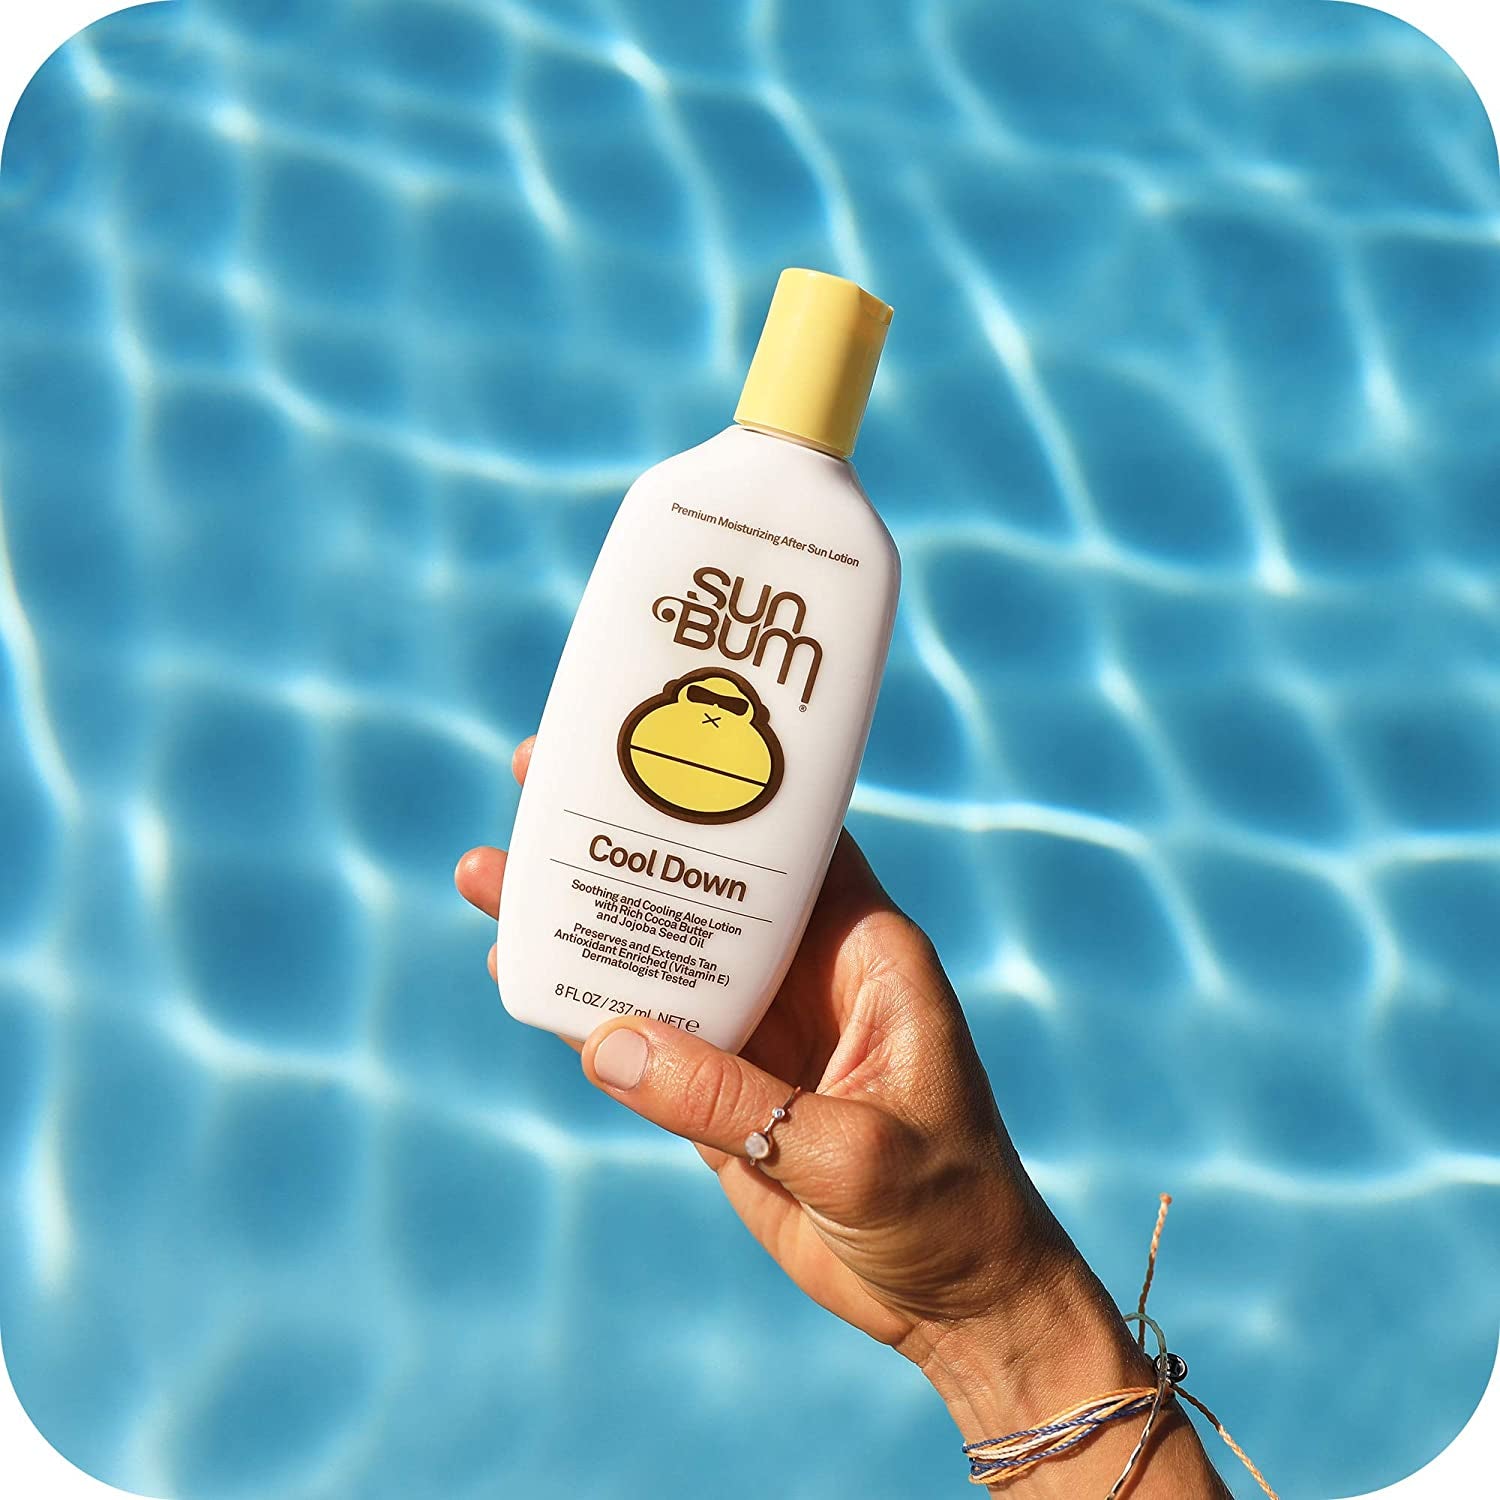 Sun Bum Cool down Aloe Vera Lotion - Vegan after Sun Care with Cocoa Butter to Soothe and Hydrate Sunburn- 8 Oz